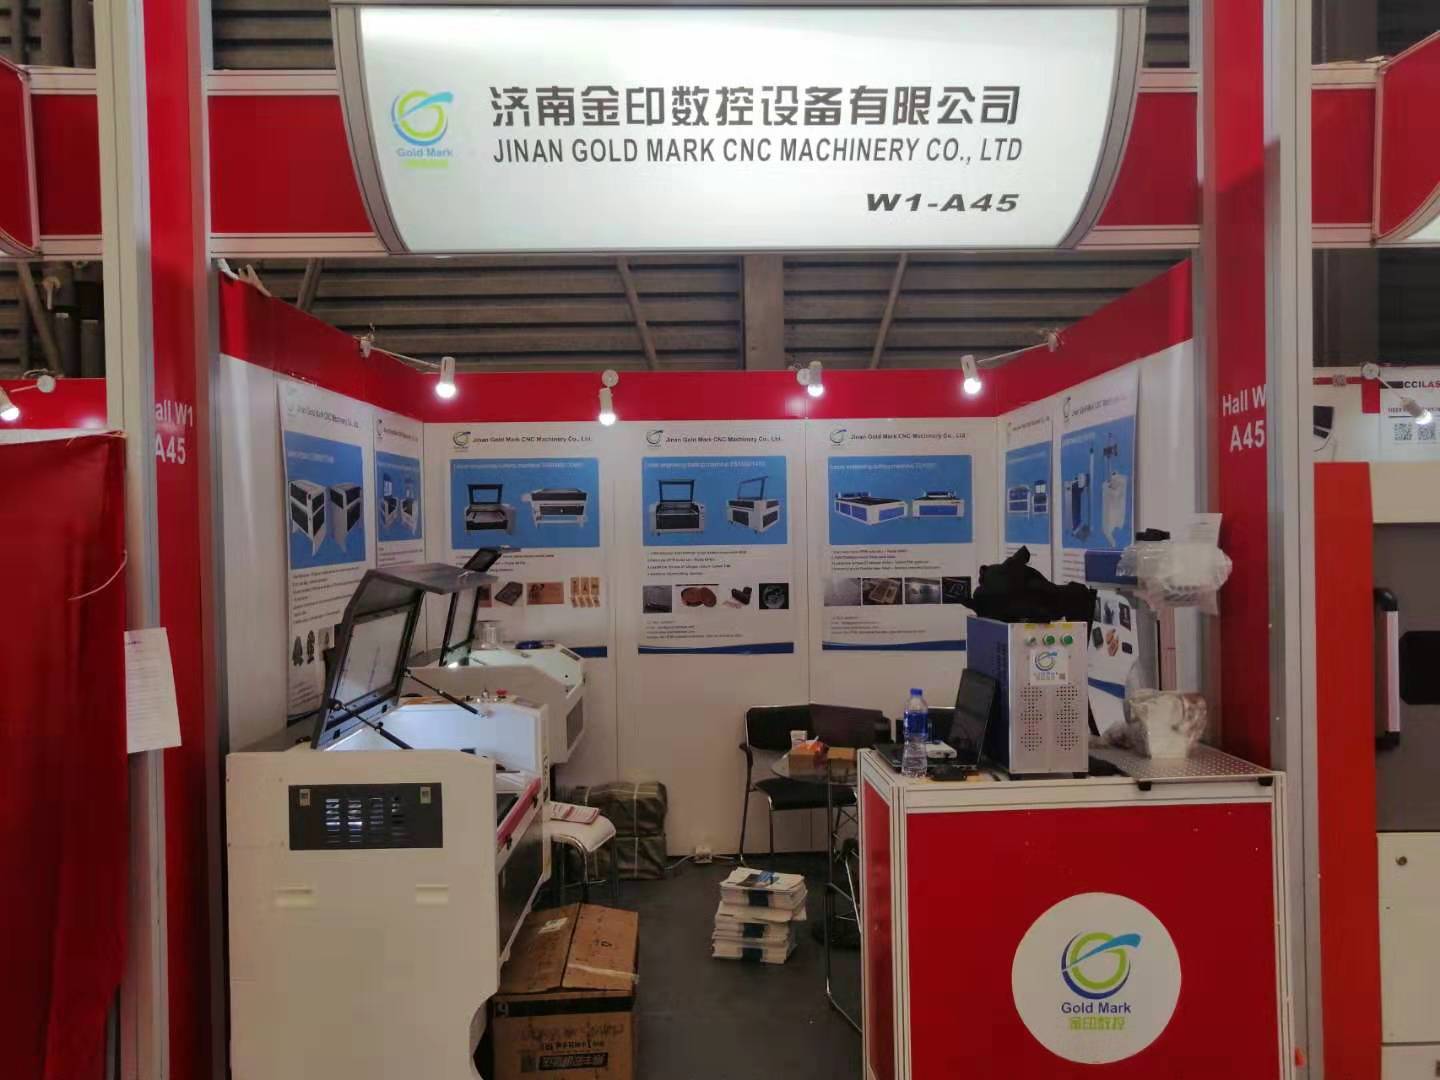 Jinan gold mark cnc machiner co.,ltd. with star products unveiled the SIGN CHINA 2019 advertising logo exhibition.